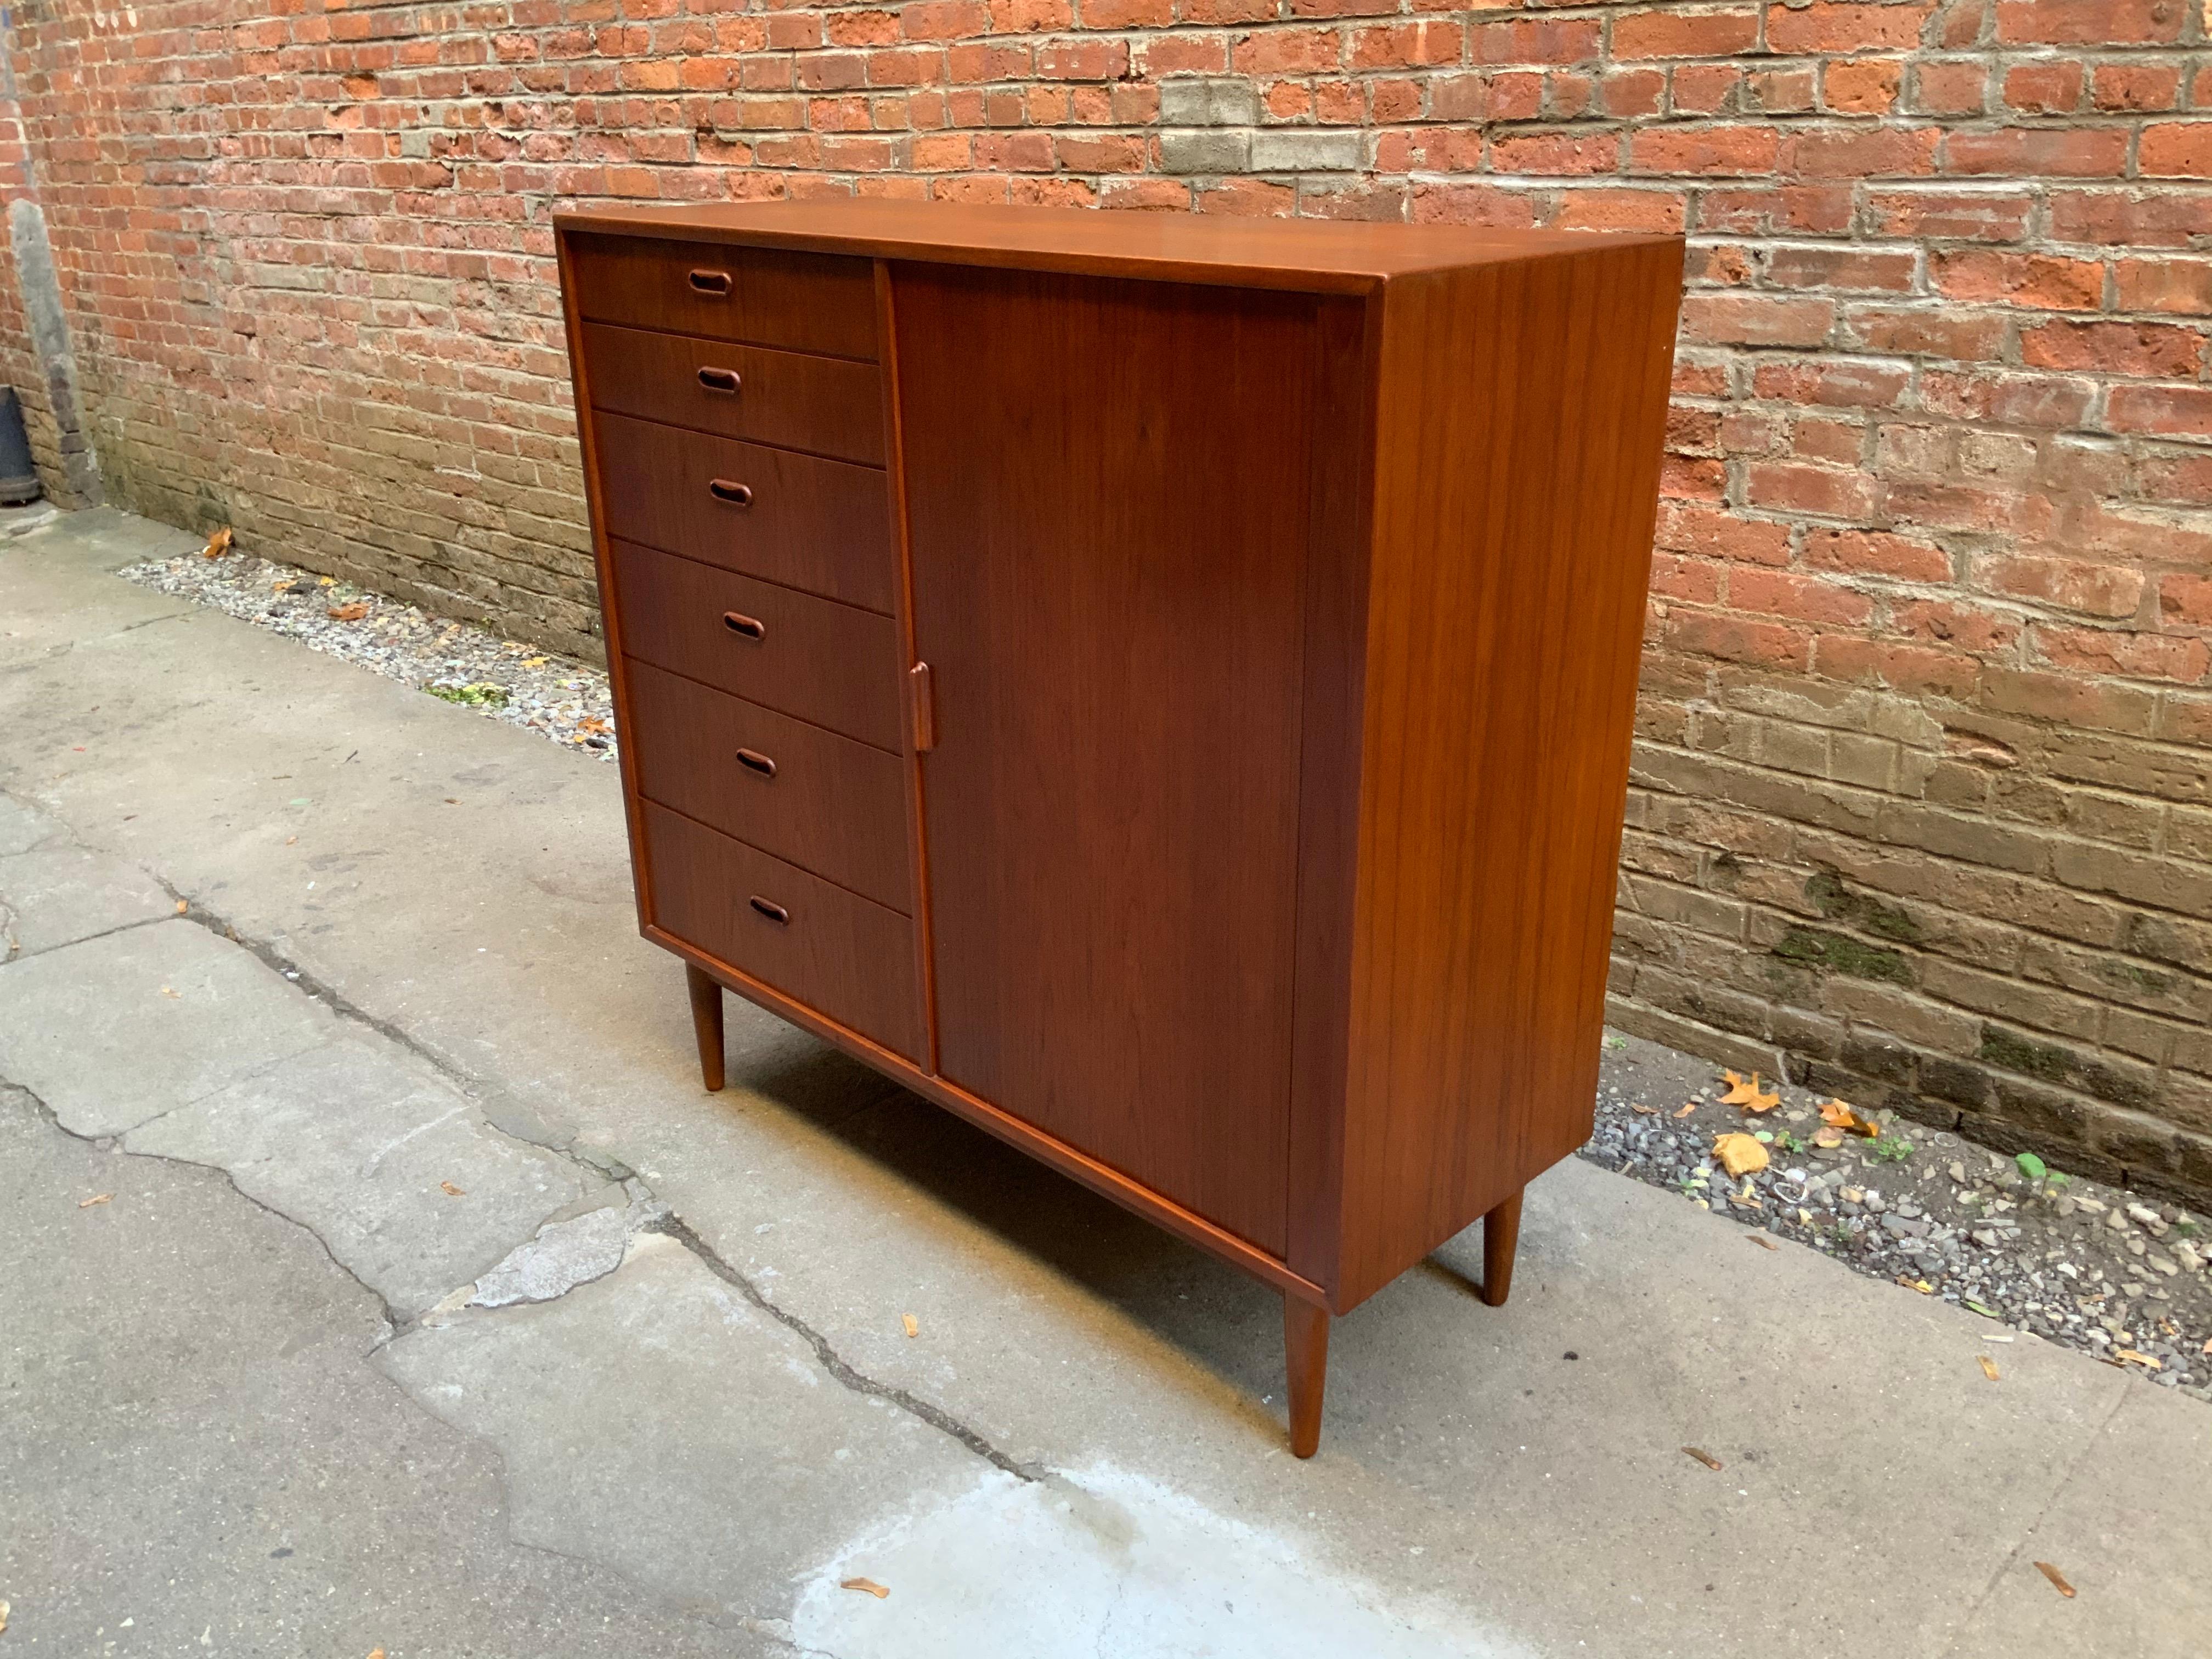 Built for maximum storage. Behind the sliding tambour door are six drawers flanked by six exterior drawers with recessed handles. Tapered legs with nicely figure teak veneers, circa 1960-1970.

Measures: 17.88